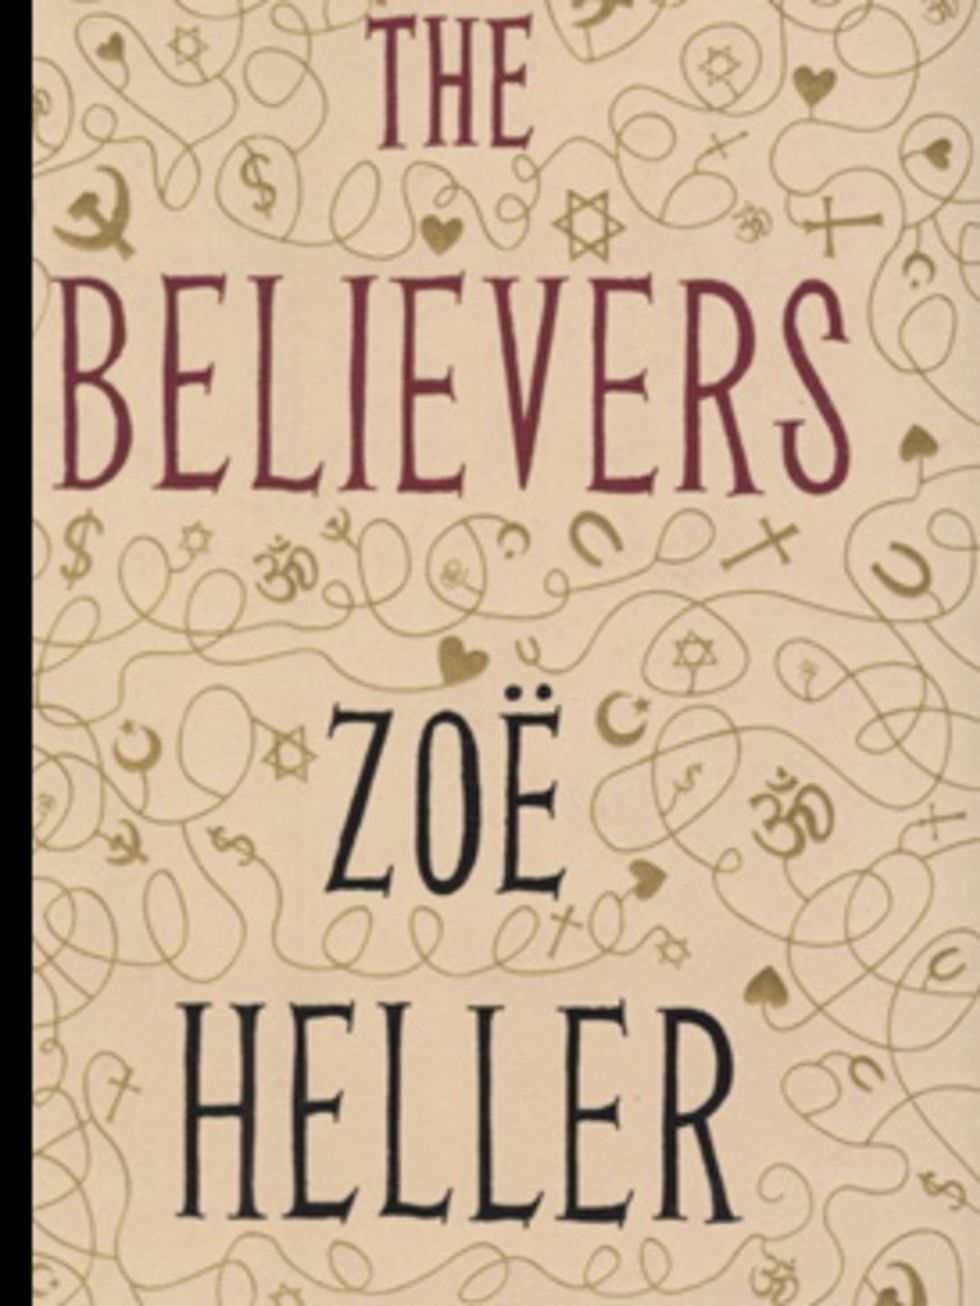 <p>The Believers, £8.49 by Zoe Heller at<a href="http://www.amazon.co.uk/Believers-Zo%C3%AB-Heller/dp/0670916129/ref=sr_1_1?ie=UTF8&amp;s=books&amp;qid=1236093105&amp;sr=1-1"> Amazon</a></p>